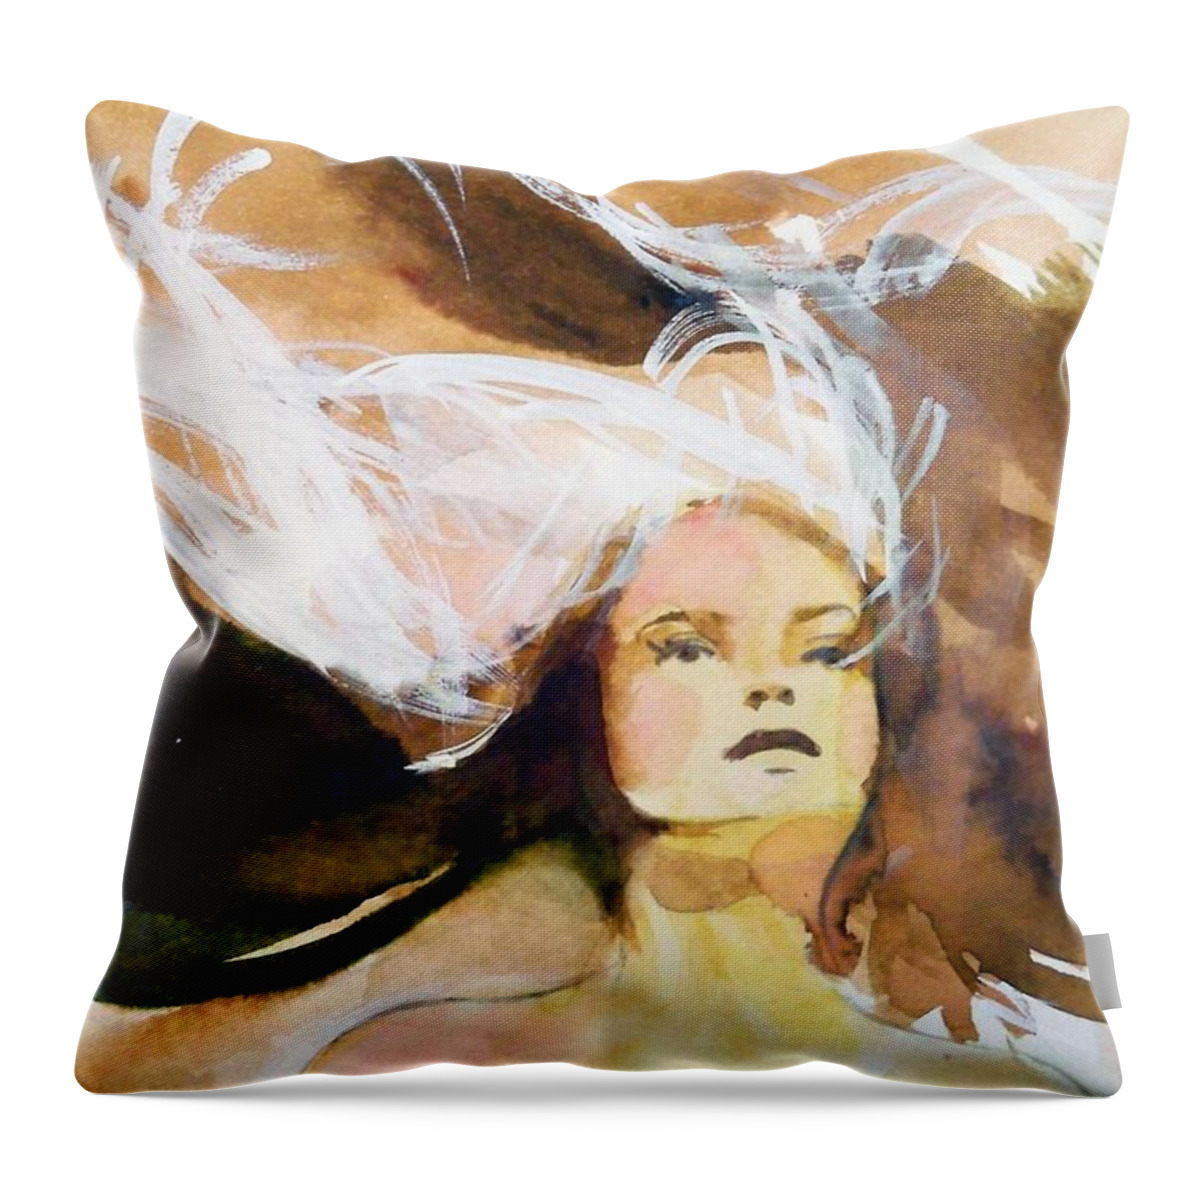 Nature Fantasy Entertainment People Figures Travel Holidays Throw Pillow featuring the painting Tatiana by Ed Heaton